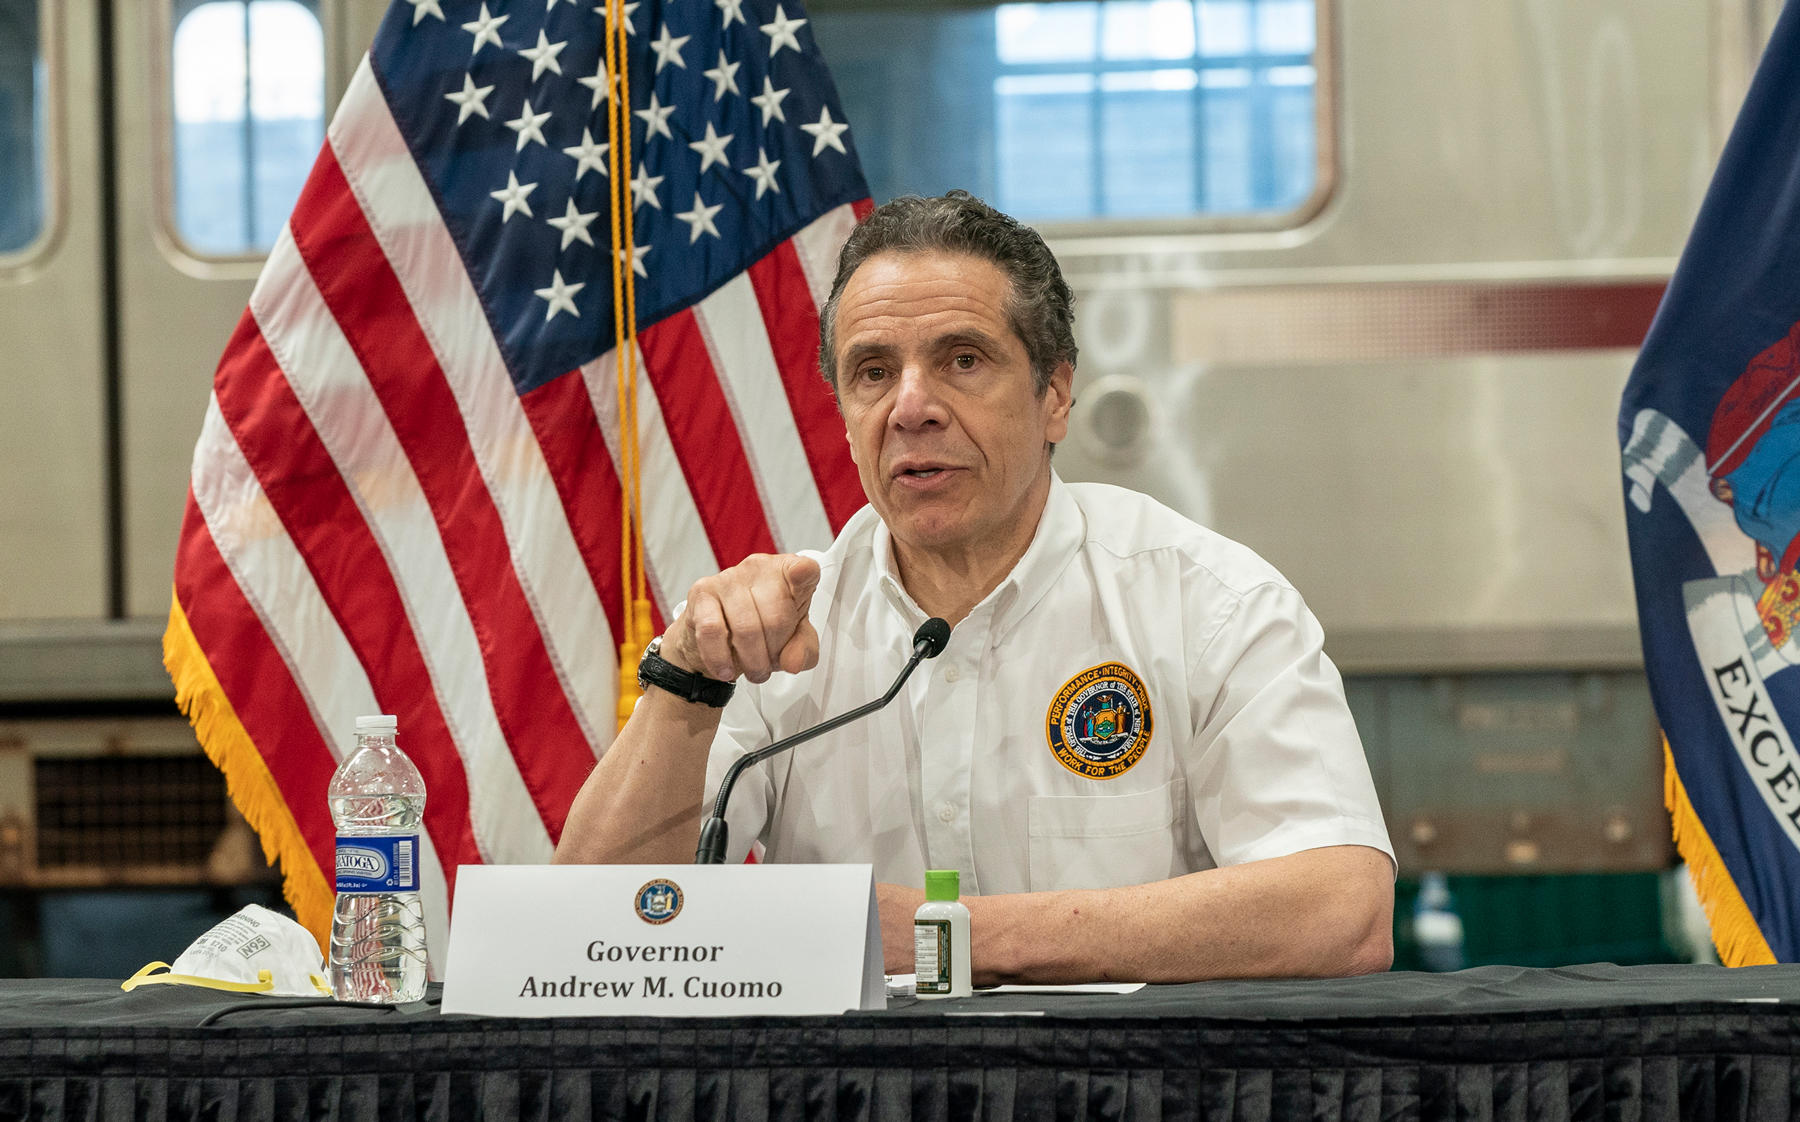 Governor Andrew Cuomo (Photo by Lev Radin/Pacific Press/LightRocket via Getty Images)